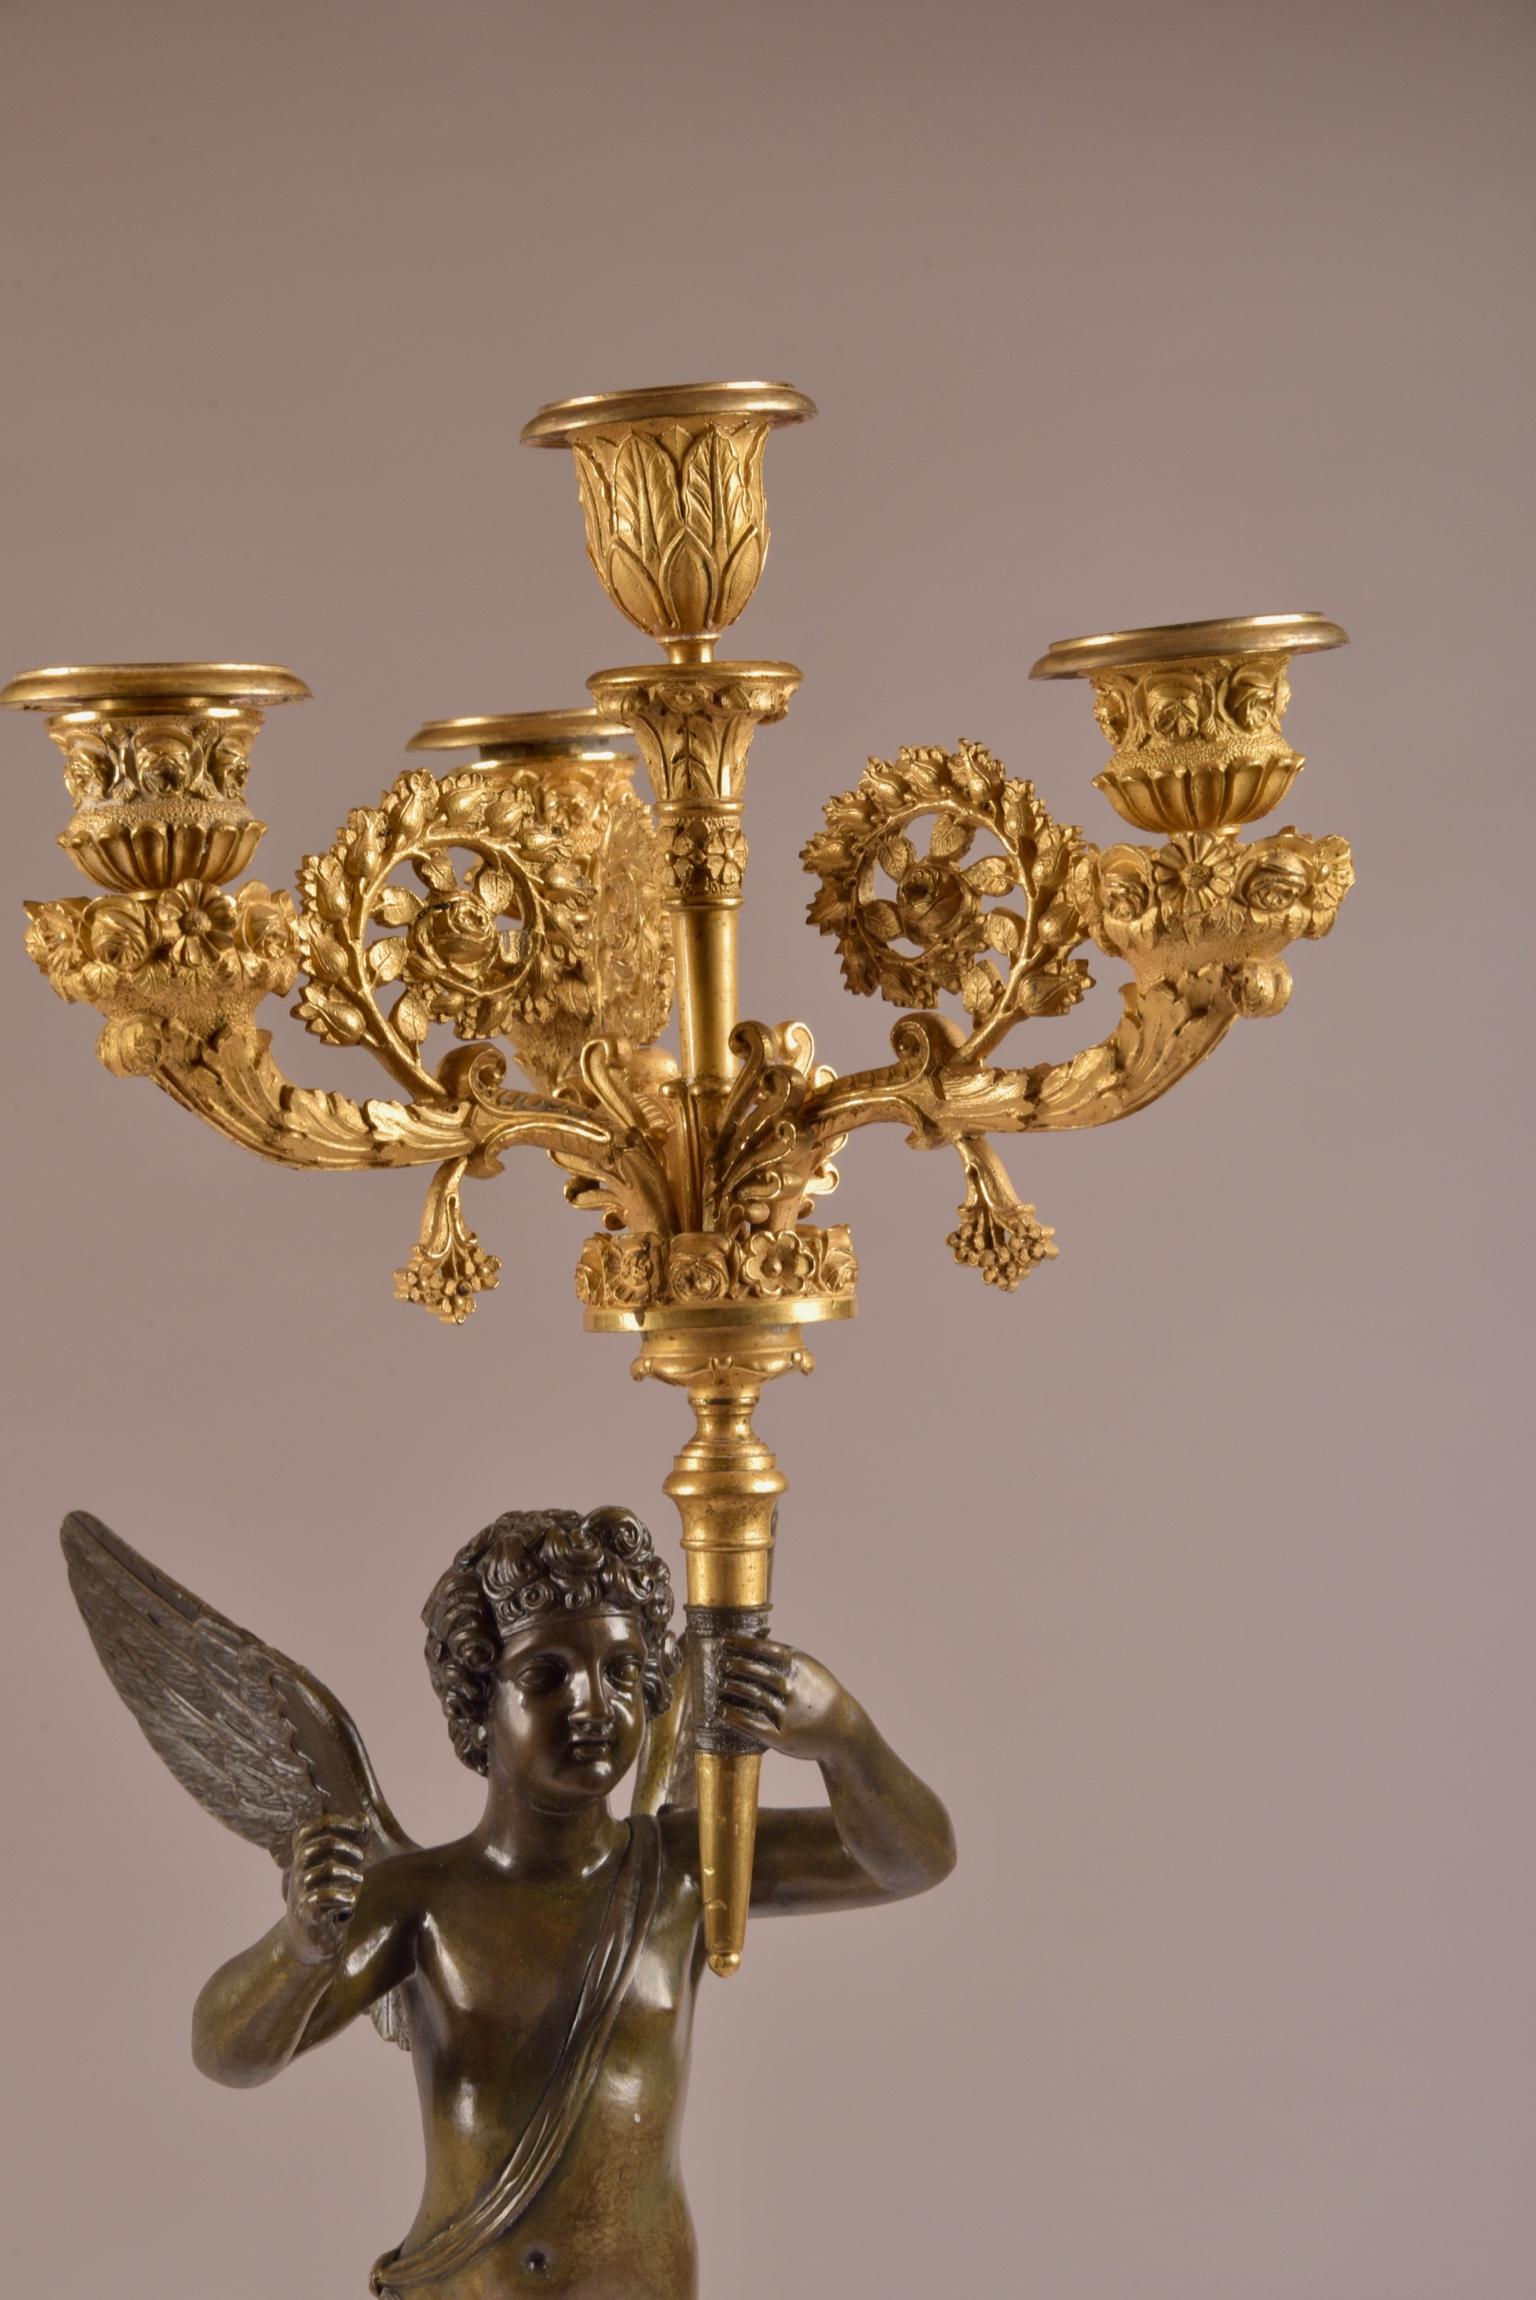 Patinated Pair of French Empire Candelabras with Putti, Superb Ormolu Candleholders, 1810  For Sale